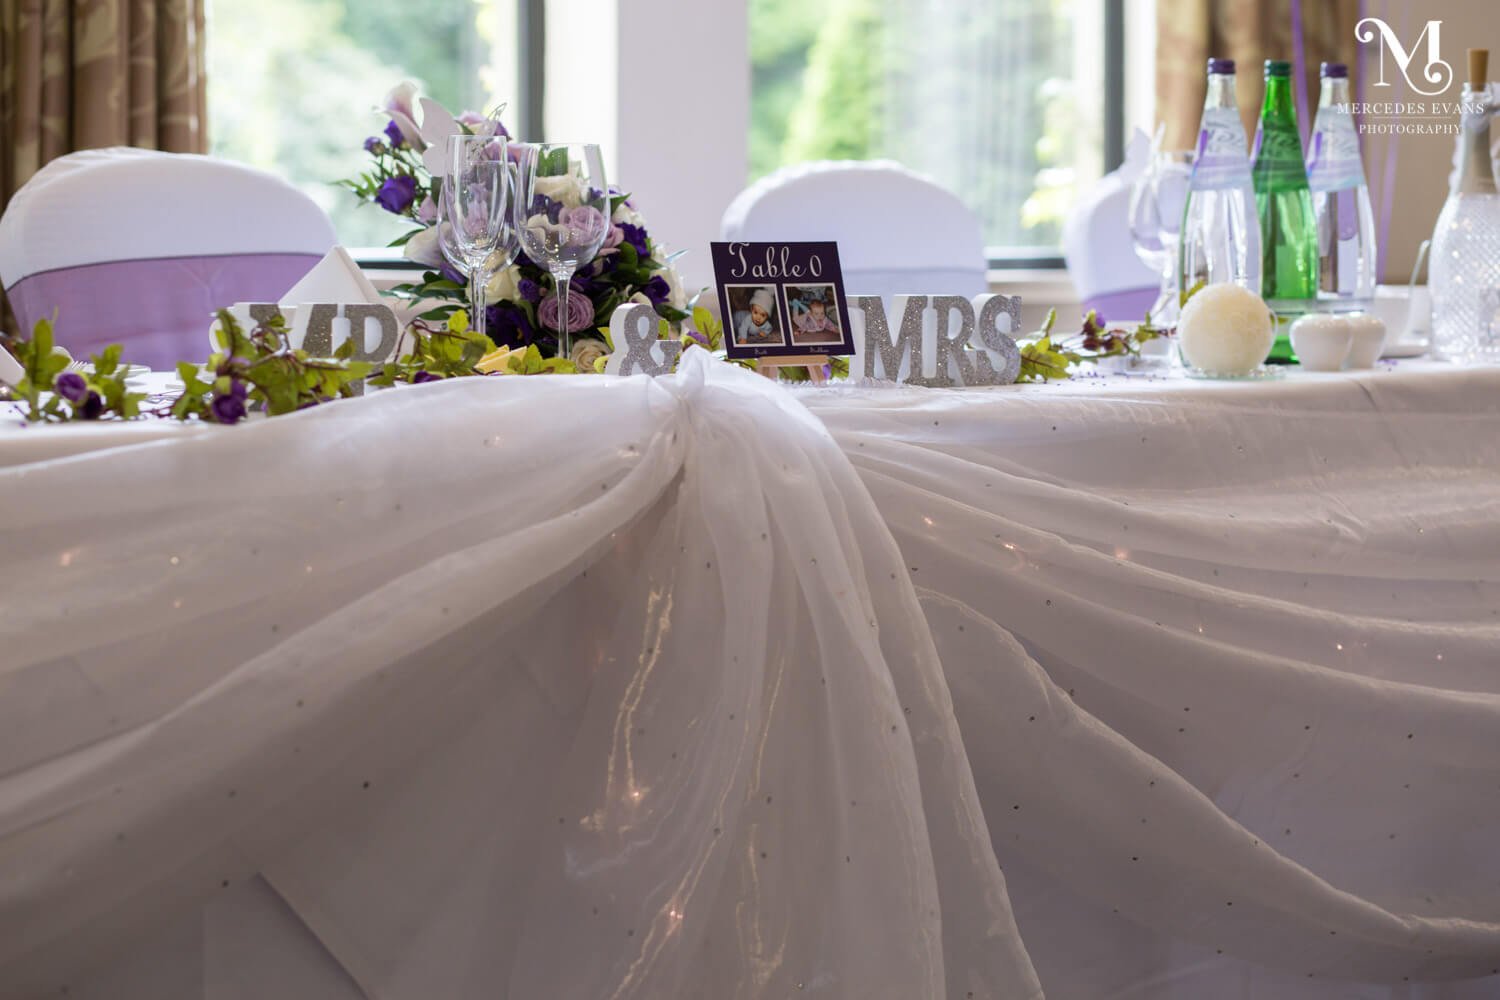 The top table dressed with white organza drapes and mr and mrs letters